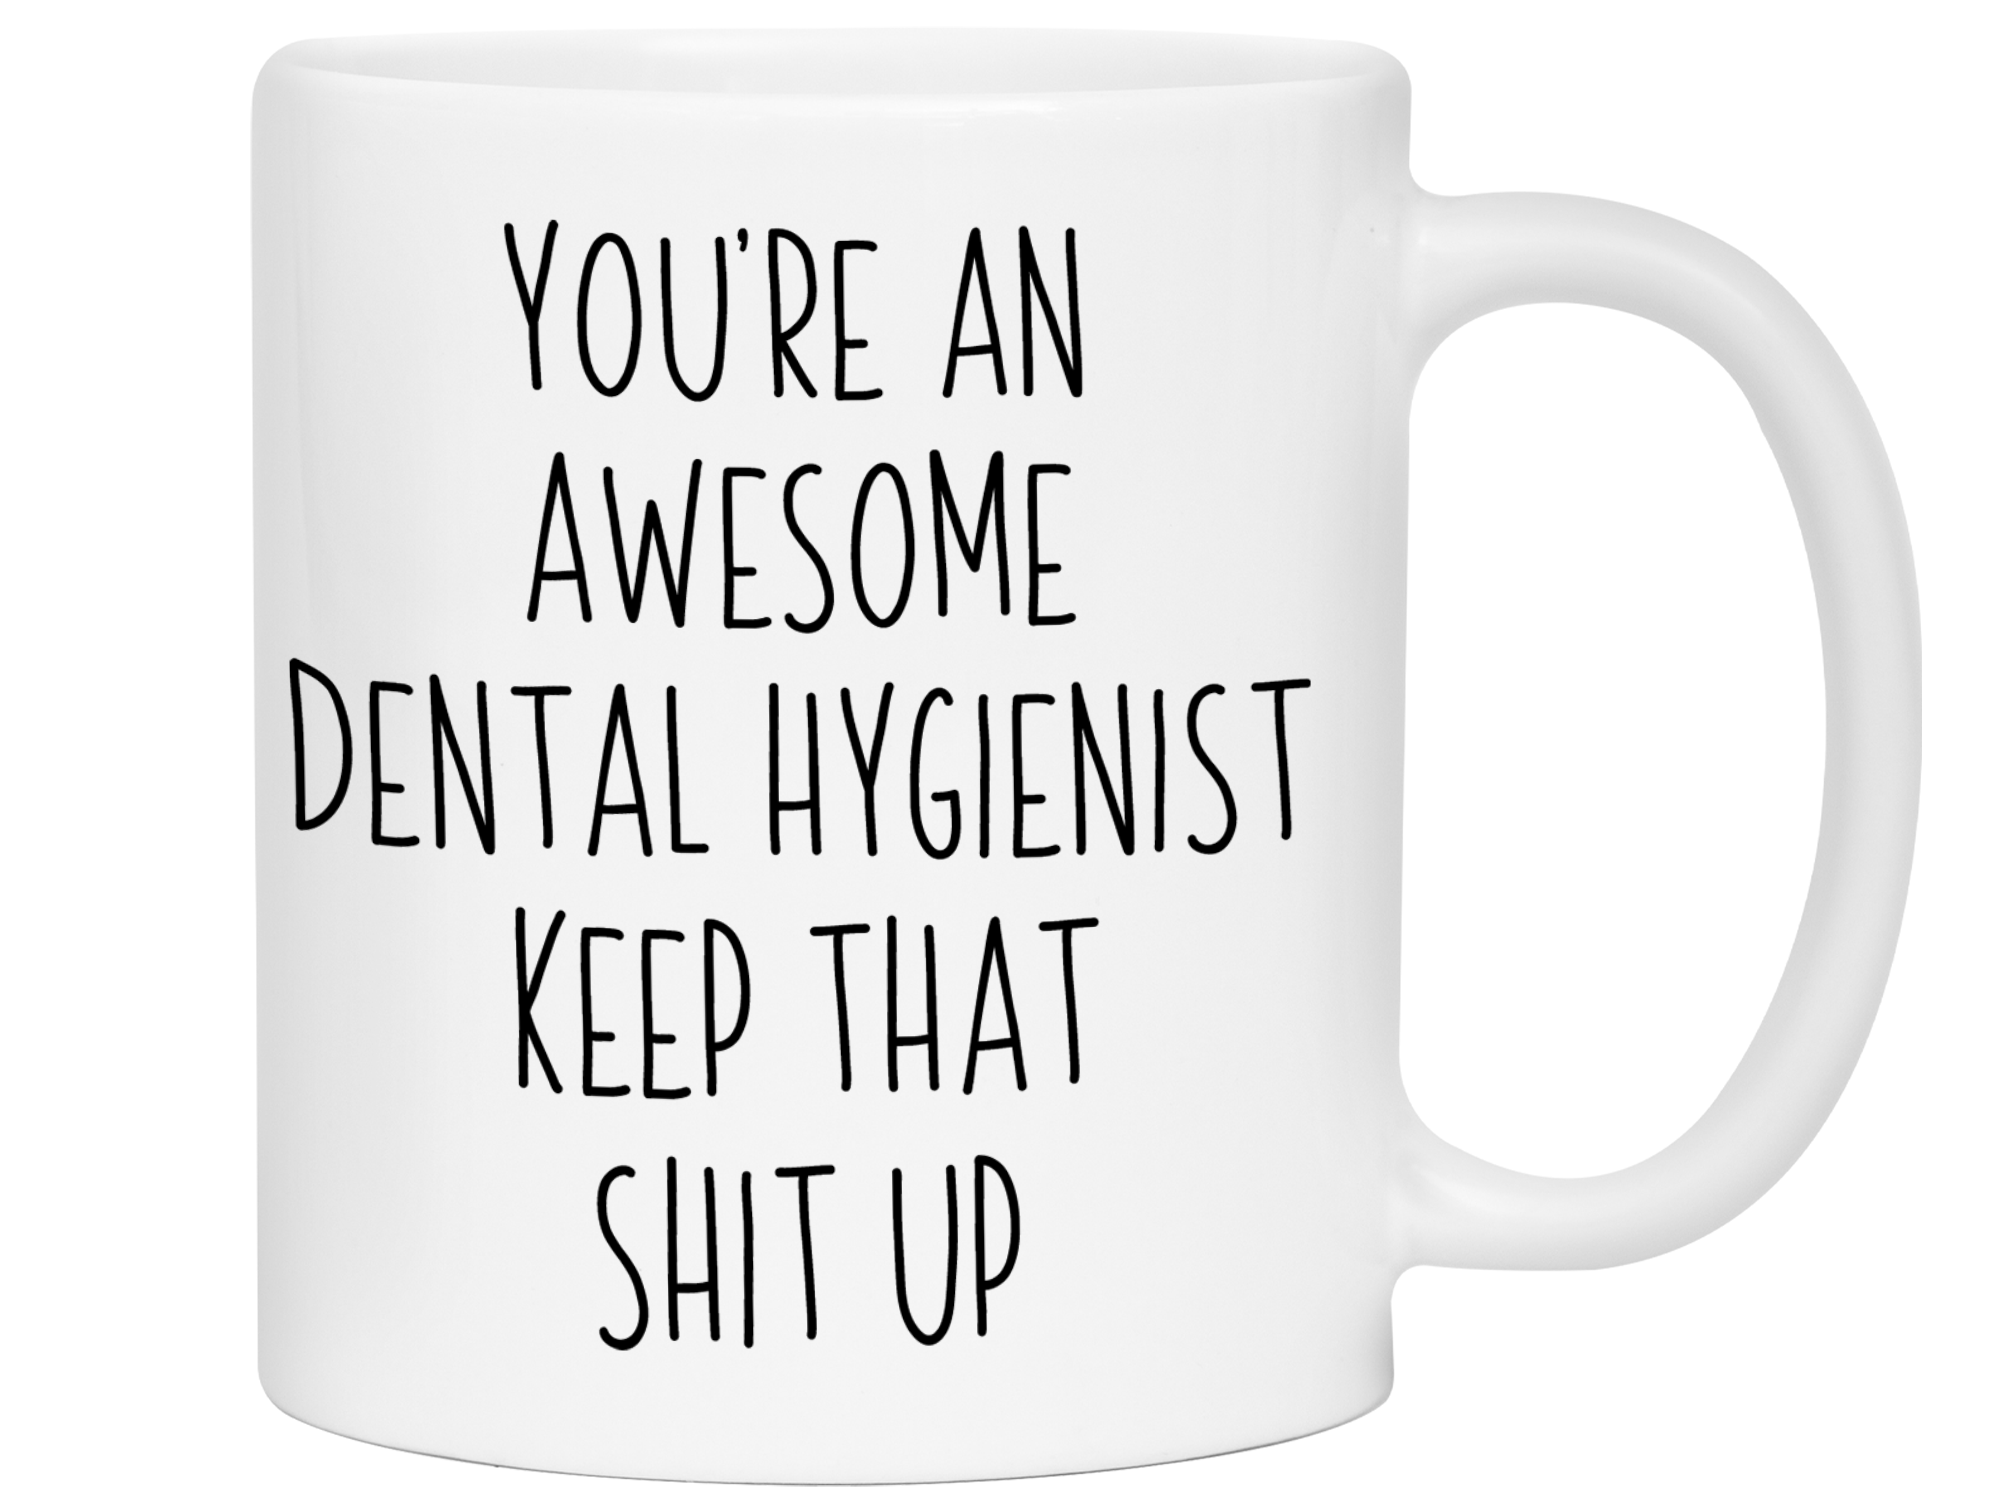 Gifts for Dental Hygienists - You're an Awesome Dental Hygienist Keep That Shit Up Coffee Mug